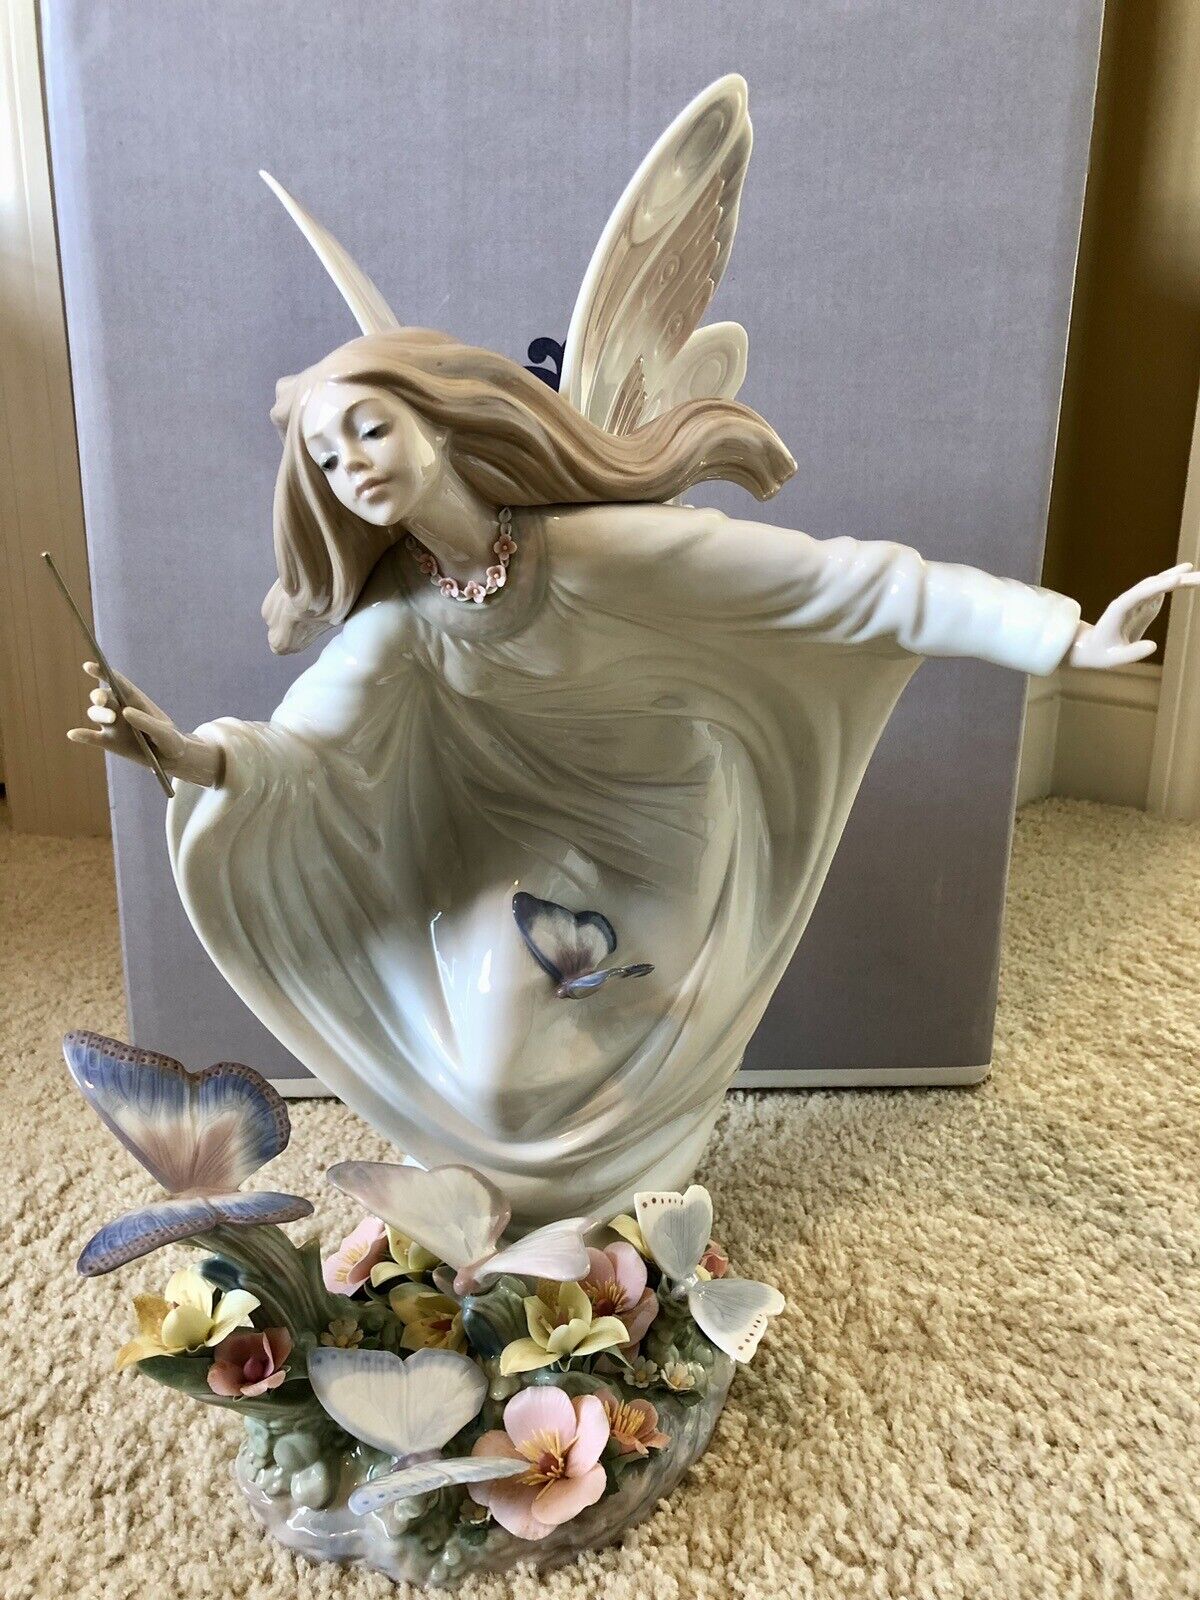 RARE  MIB LLADRO FAIRY OF THE BUTTERFLIES 1850 FIGURINE MADE IN SPAIN - RETIRED